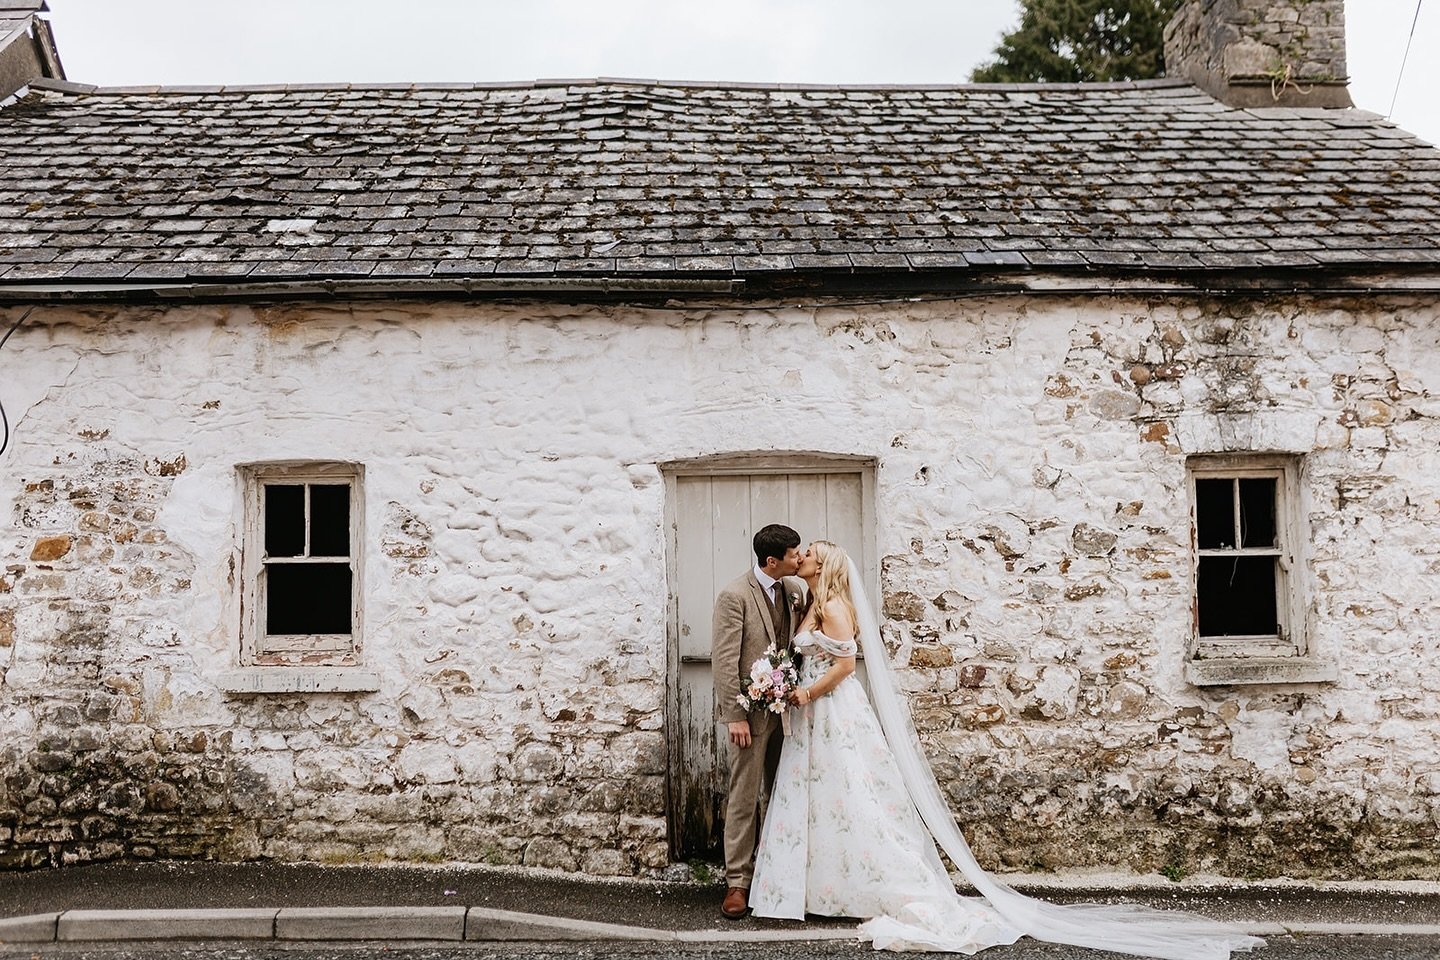 Throwback to this stunning day for @rachelmangan08  and Sean!💘✨

T minus 10 days until my next wedding! Not that I&rsquo;m counting down🙌🏼😁 

Can&rsquo;t wait to work alongside a whole range of lush suppliers for Claire and Aled&rsquo;s wedding d